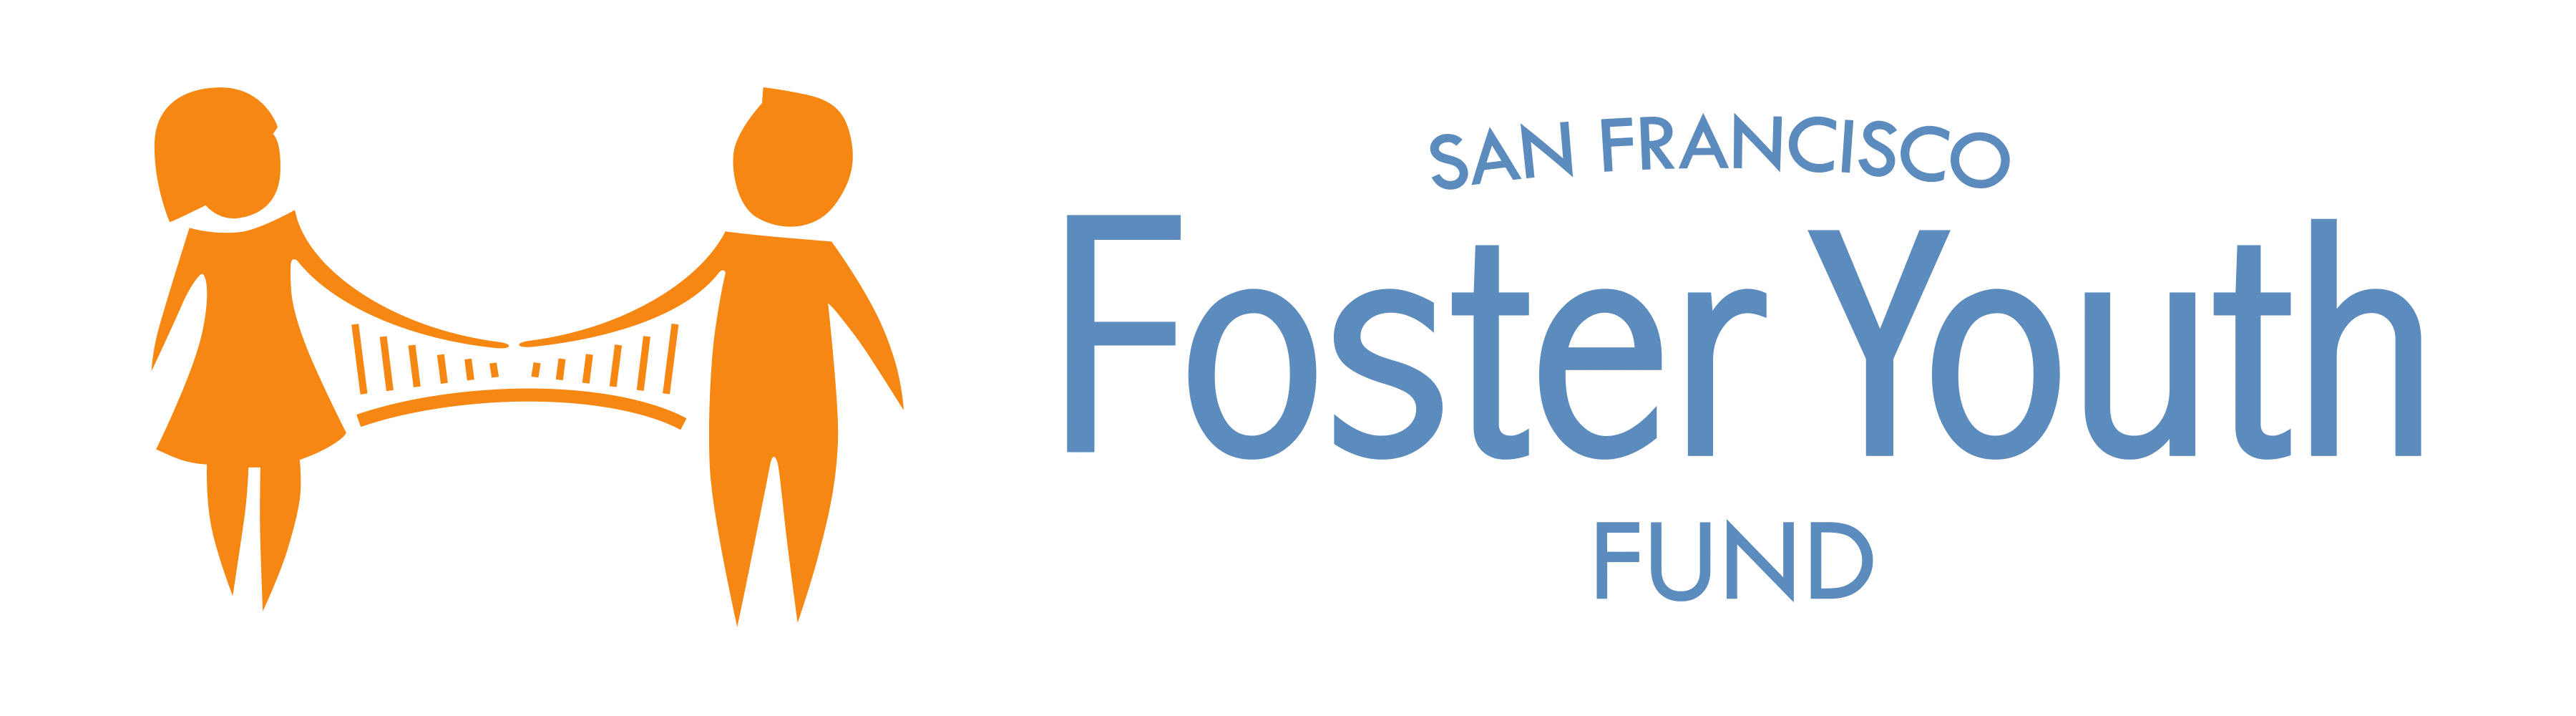 San Francisco Foster Youth Fund